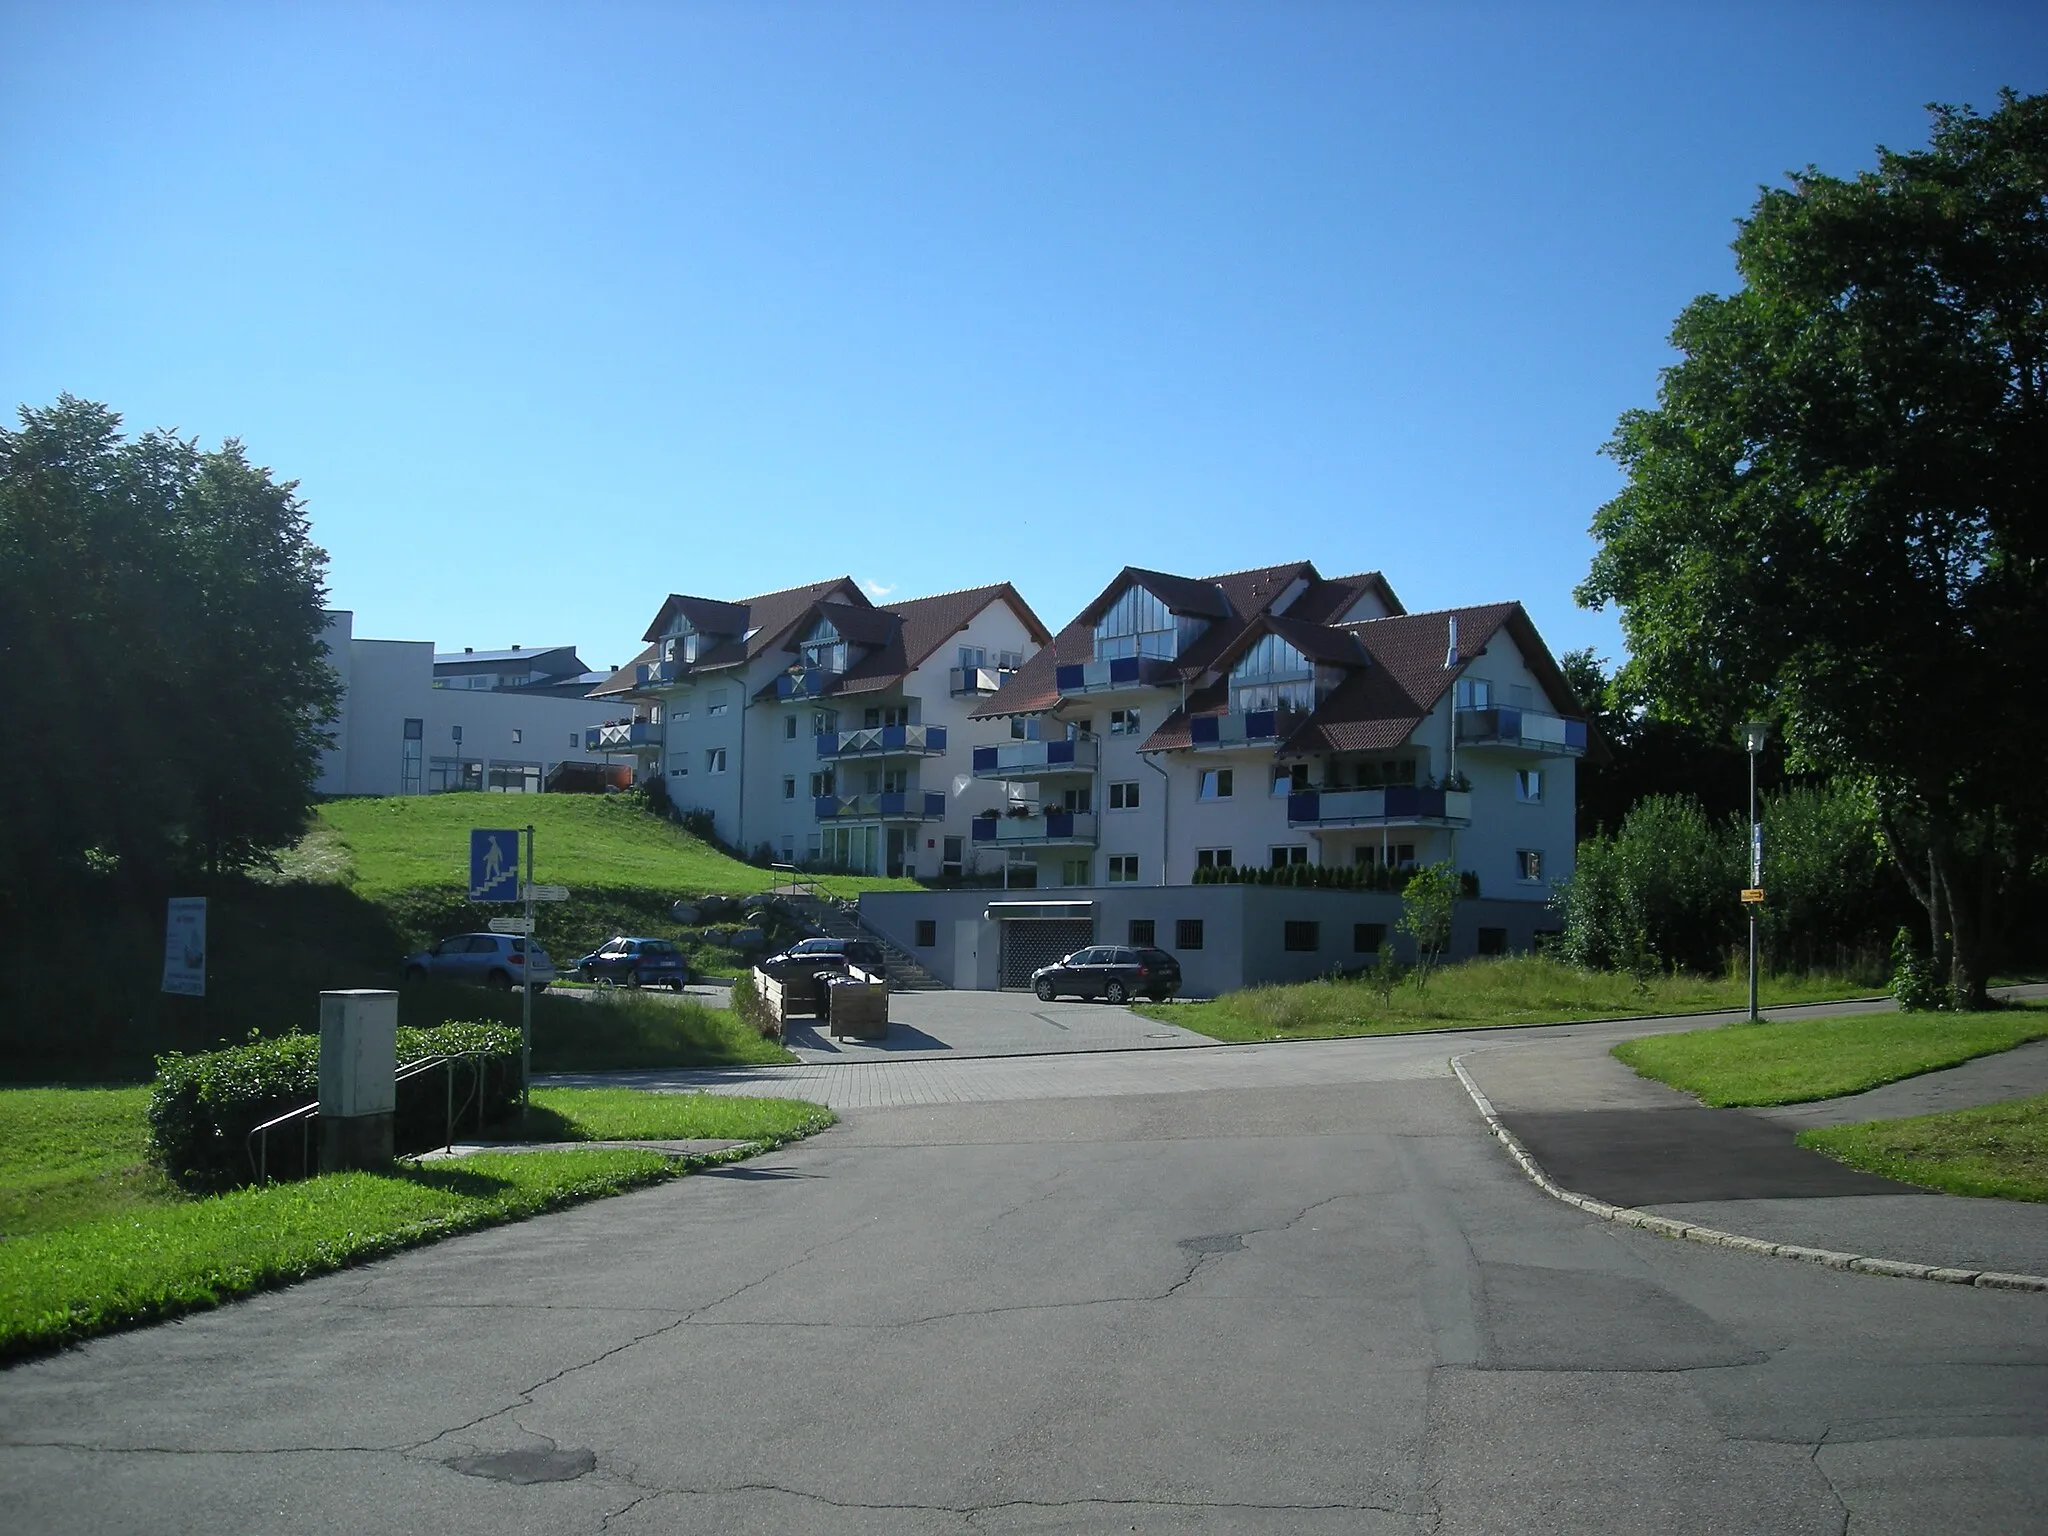 Photo showing: A residential neighborhood in Oberndorf, Baden-Württemberg (Germany).